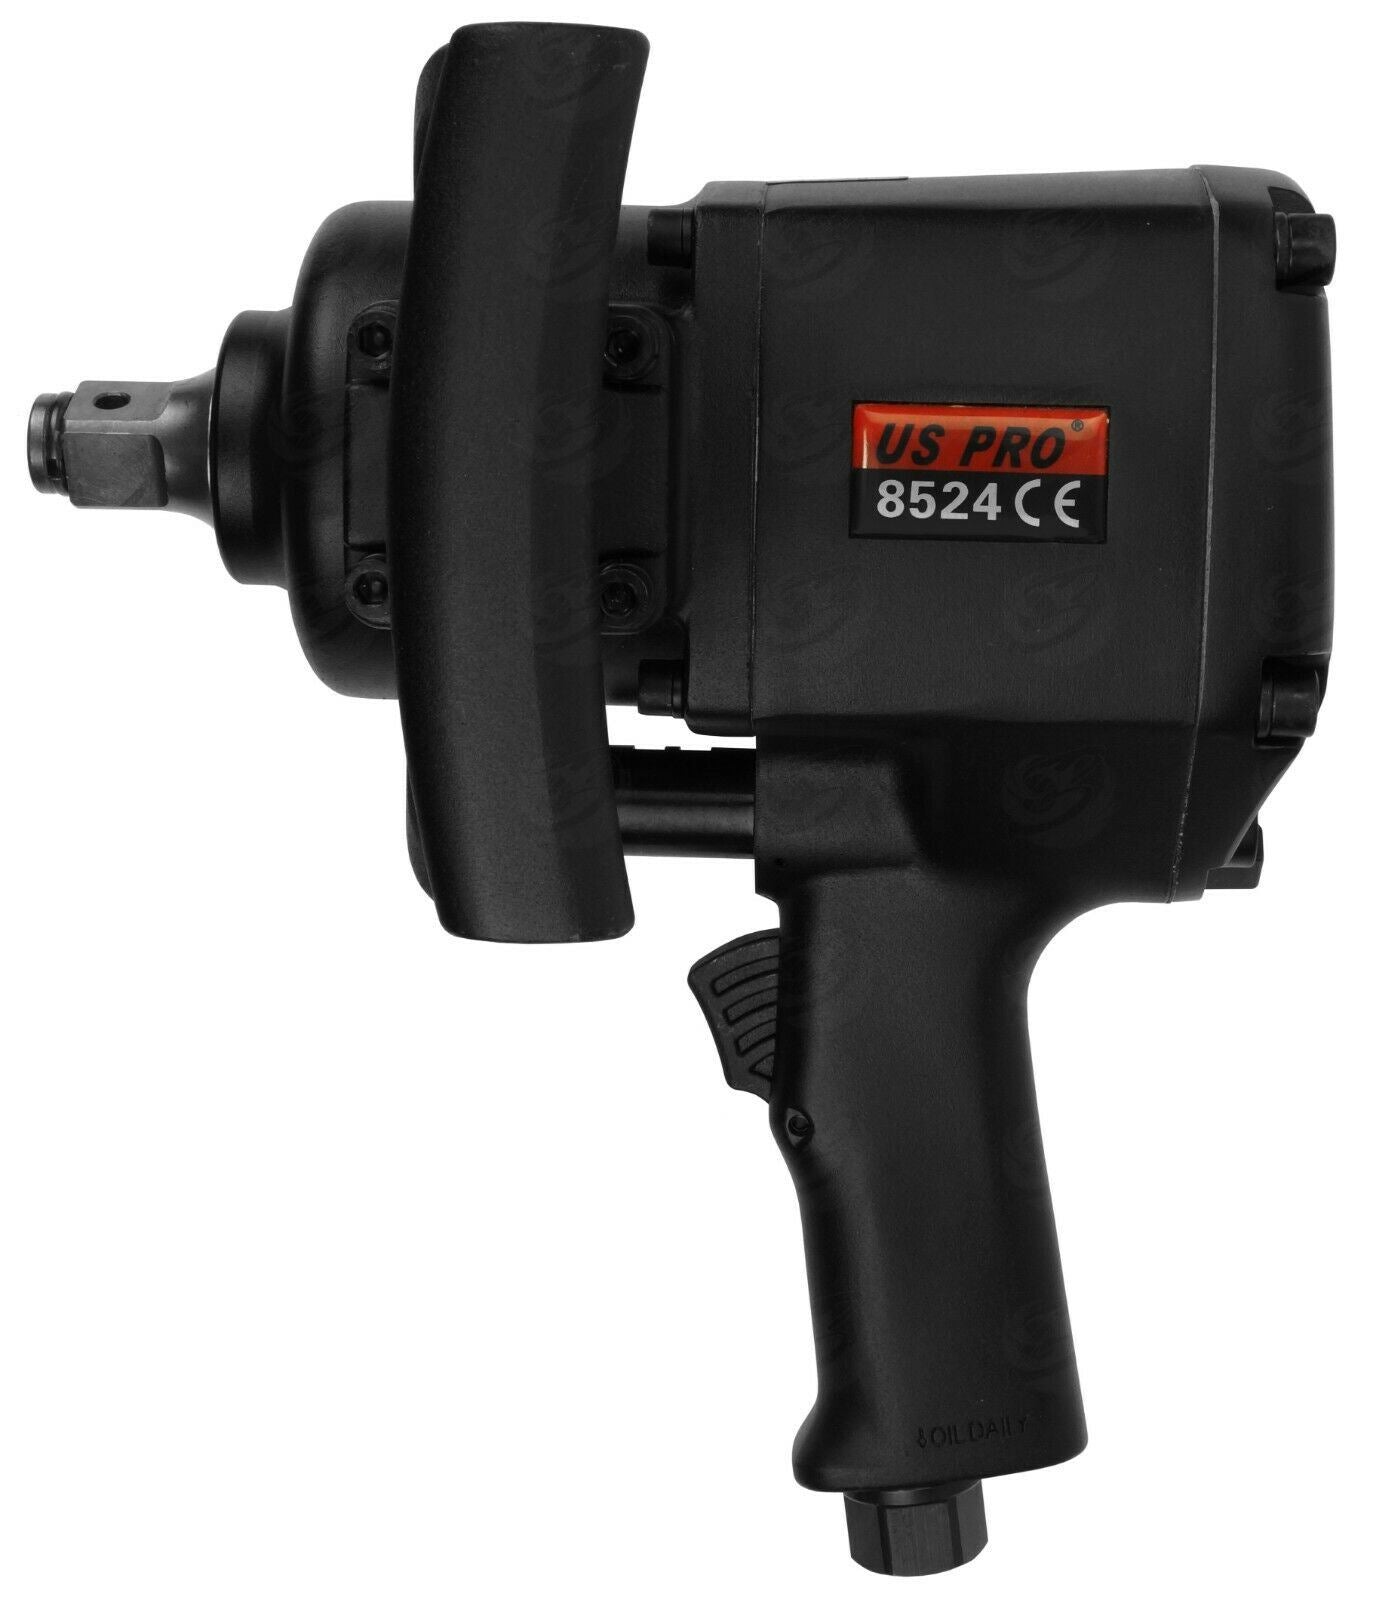 US PRO 3/4" DRIVE INDUSTRIAL AIR IMPACT WRENCH 1800Nm